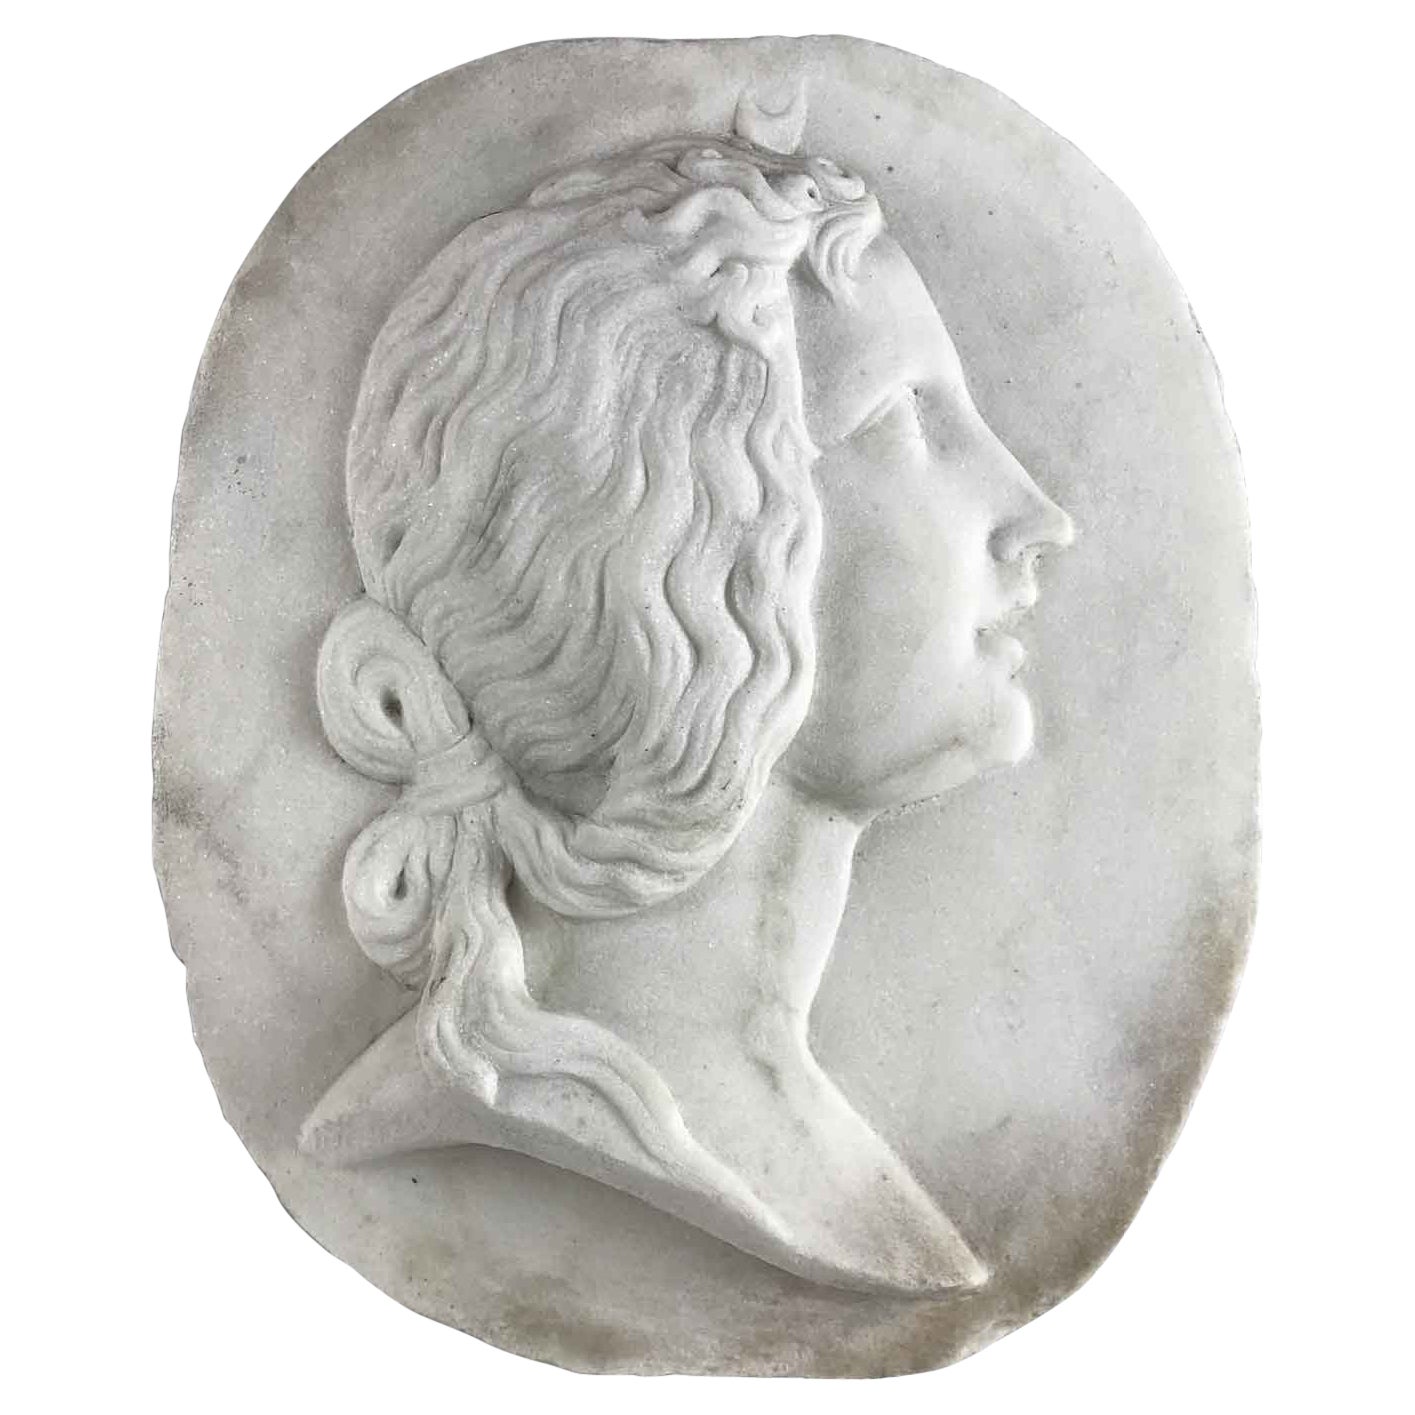 20th Century Italian White Marble Female Portrait Relief with Crescent Moon